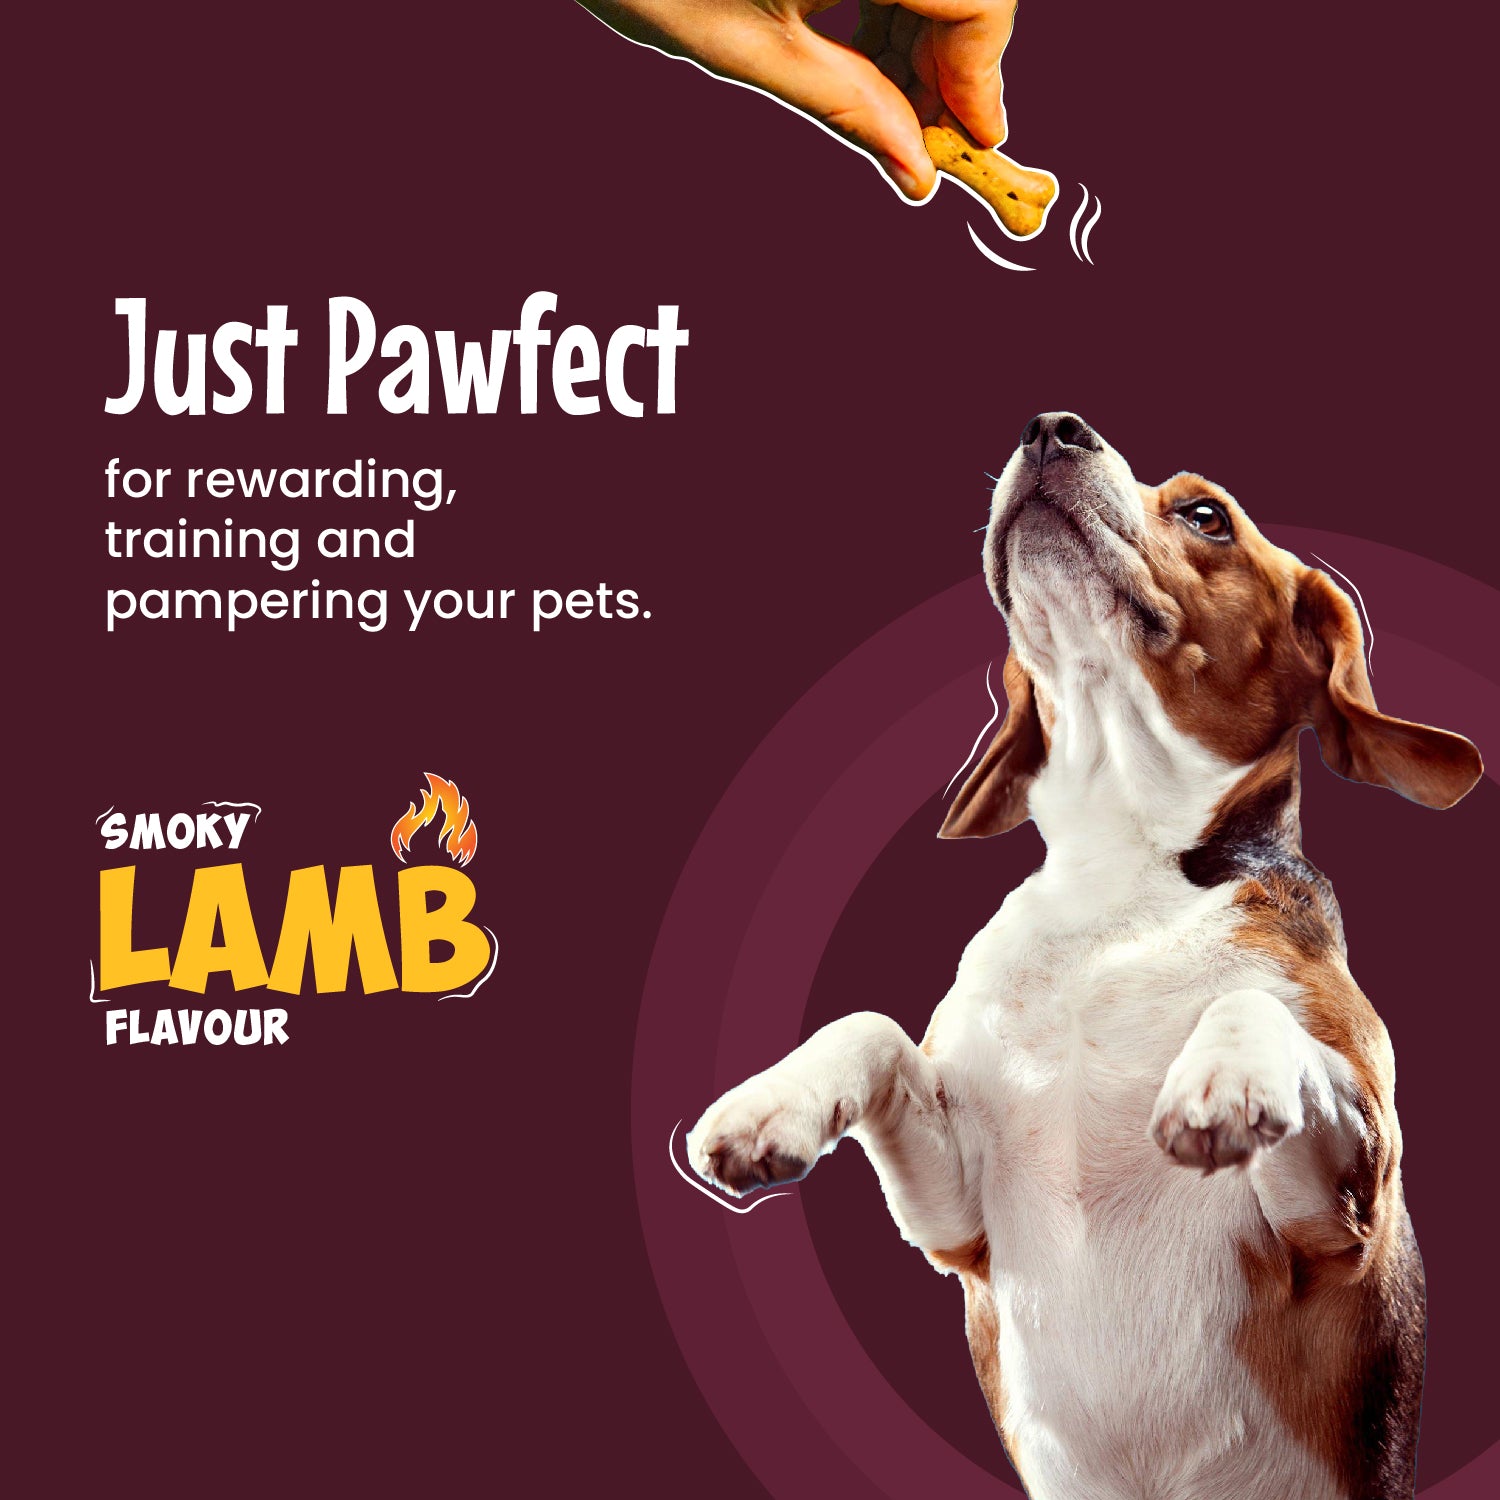 Just pawfect for rewarding, training and pampering your pets. 